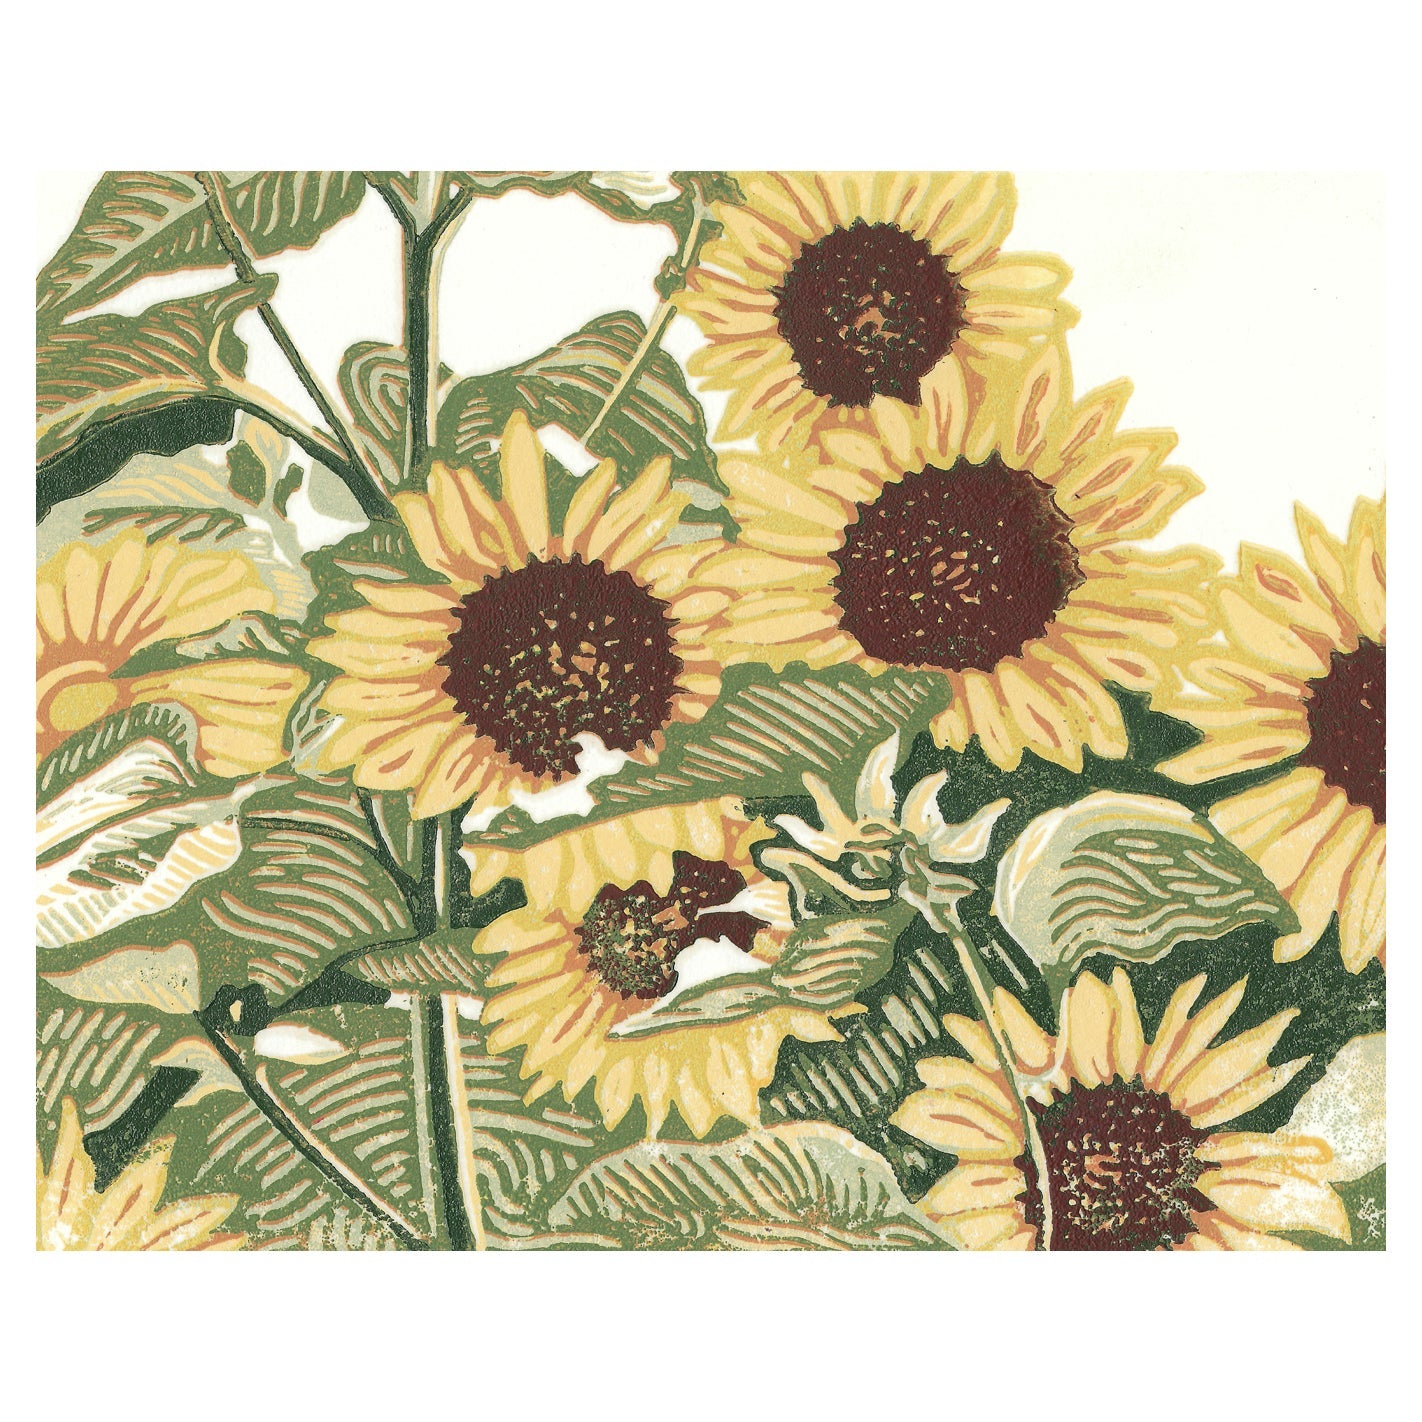 Sunflower Patch is a fun, dynamic hand-pulled and hand-carved seven-color print meant to elicit joy and a sense of belonging.  The floral art was created by Michigan printmaker Natalia Wohletz of Peninsula Prints.